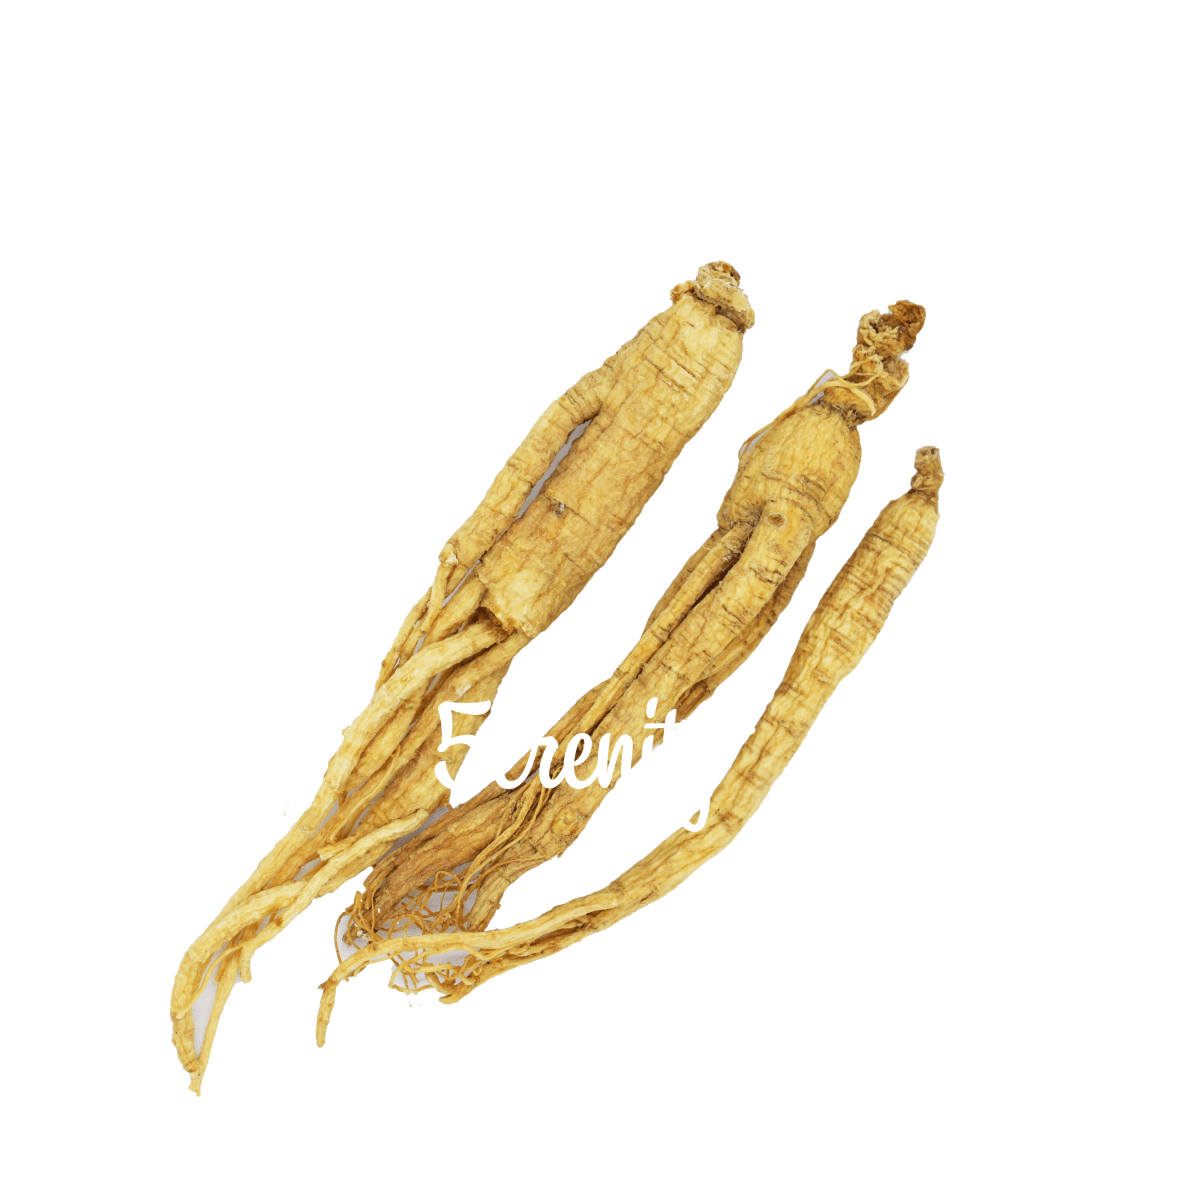 Ginseng-on-white-background- What are the skincare benefits of Ginseng or Ginseng Tea?